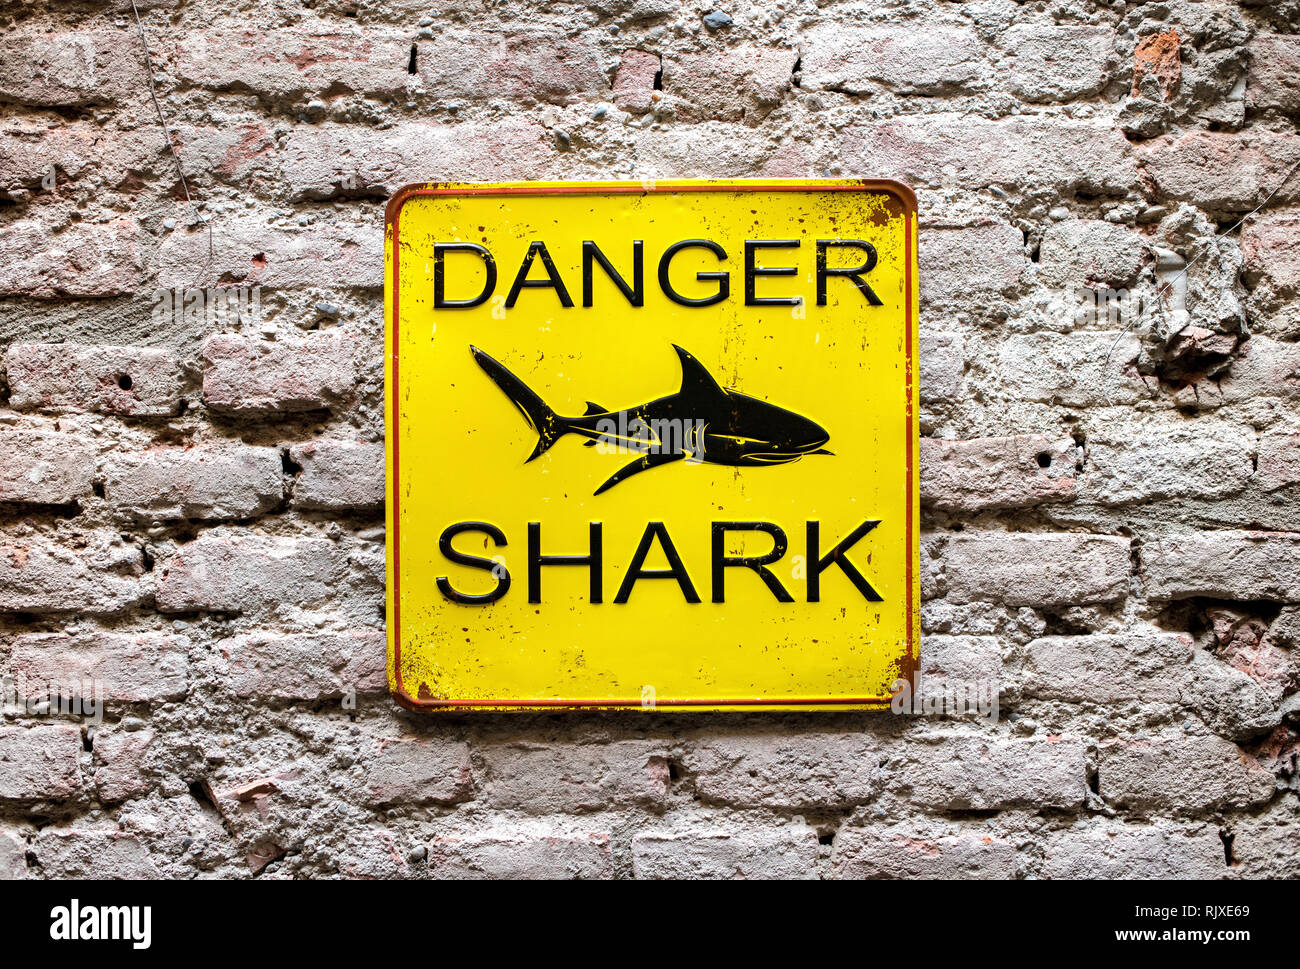 Danger Shark yellow warning sign on an old brick wall with a picture of a shark and text in a close up view Stock Photo